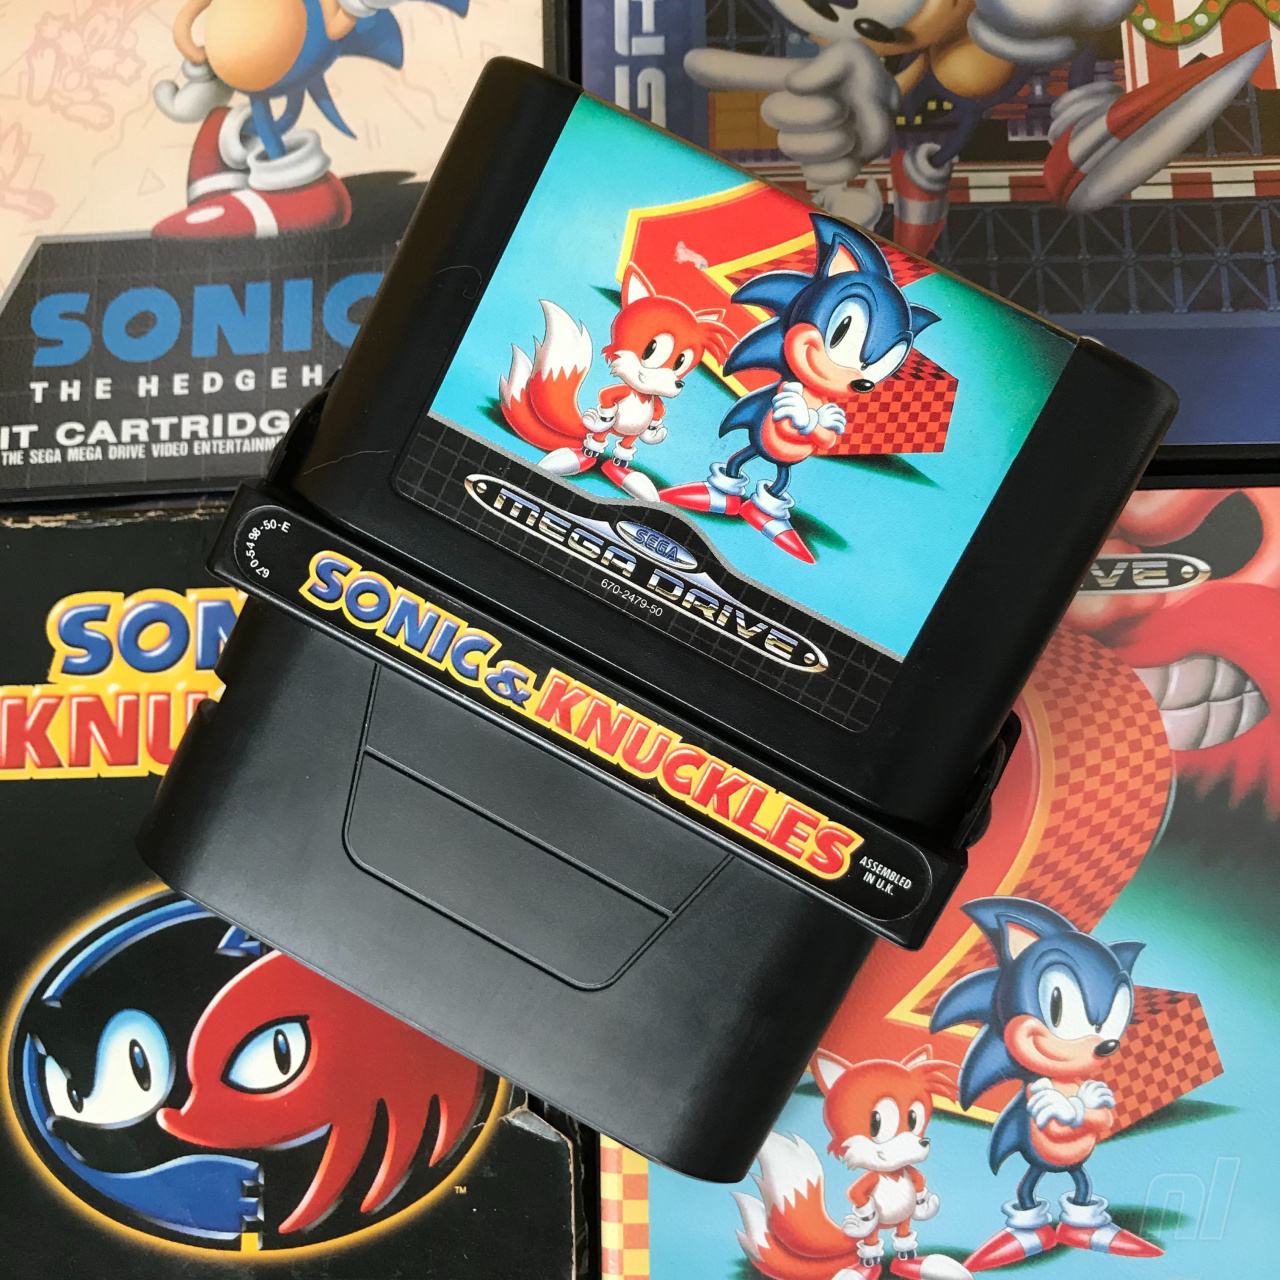 After 1 month of waiting for it, my Sonic Classic Heroes cartridge